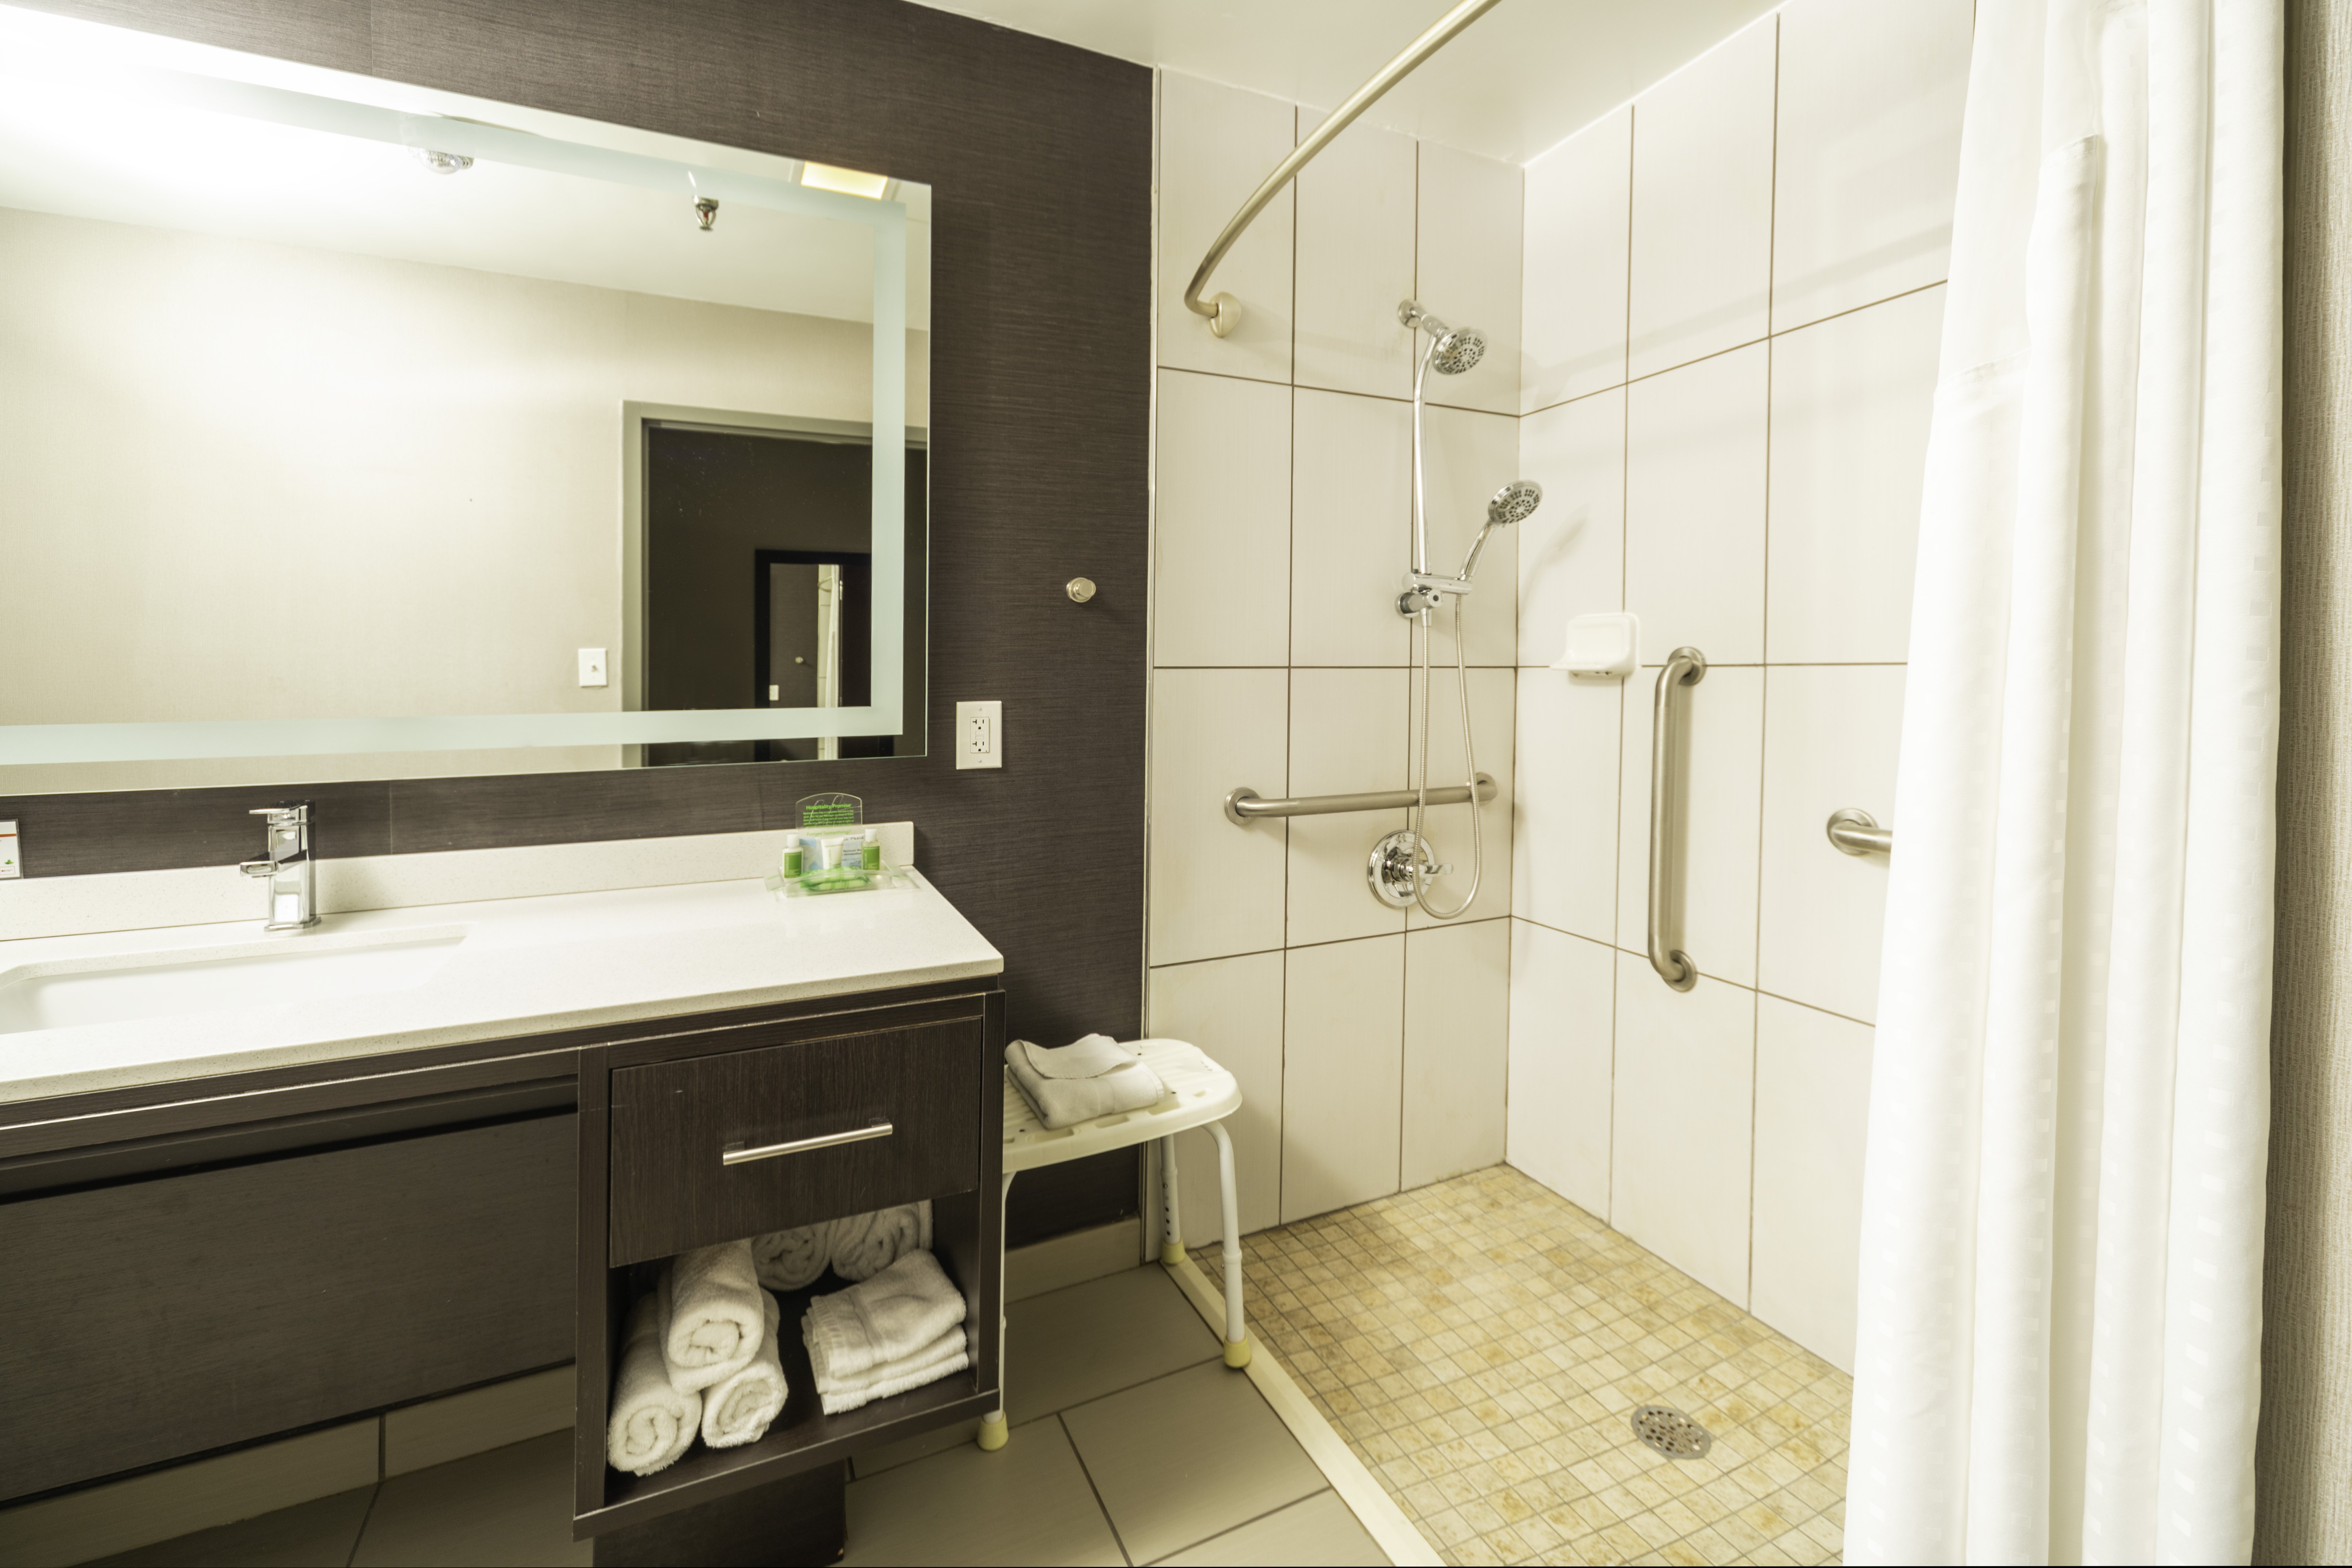 We have designed our accessible bathroom for your convenience.